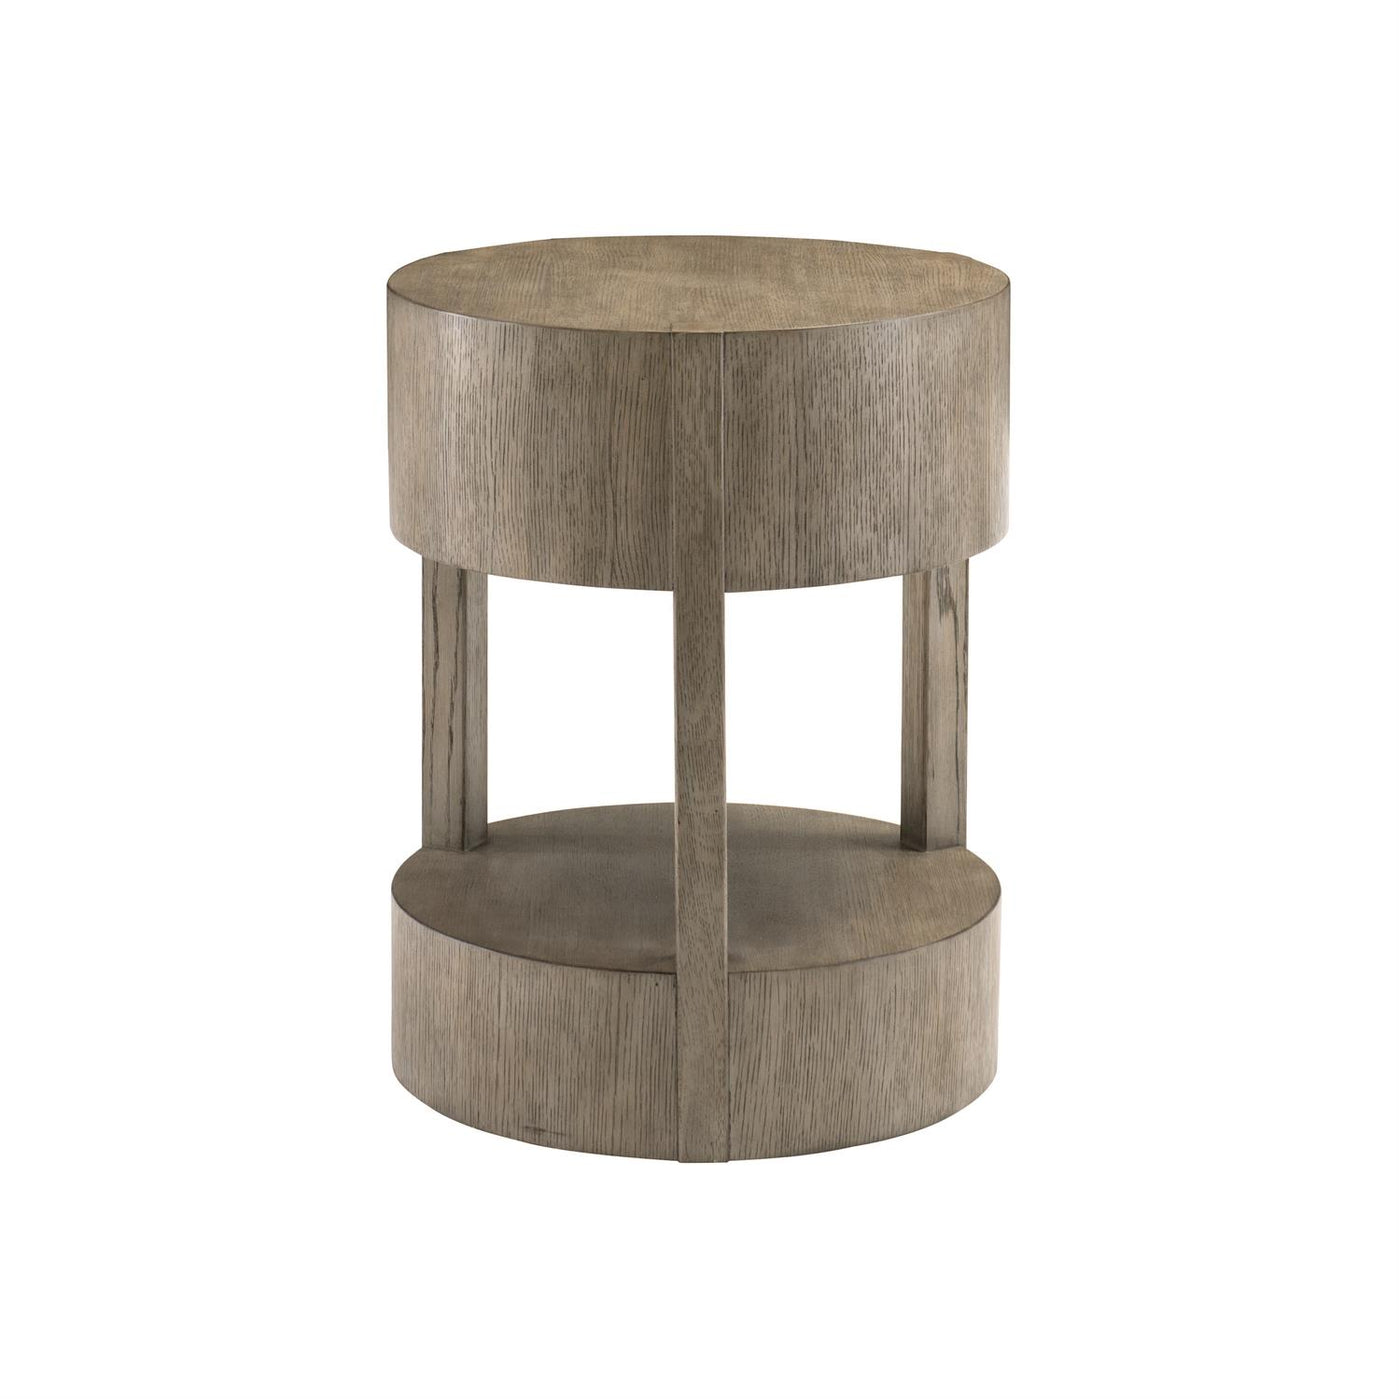 SIDE TABLE ROUND RUSTIC GREY